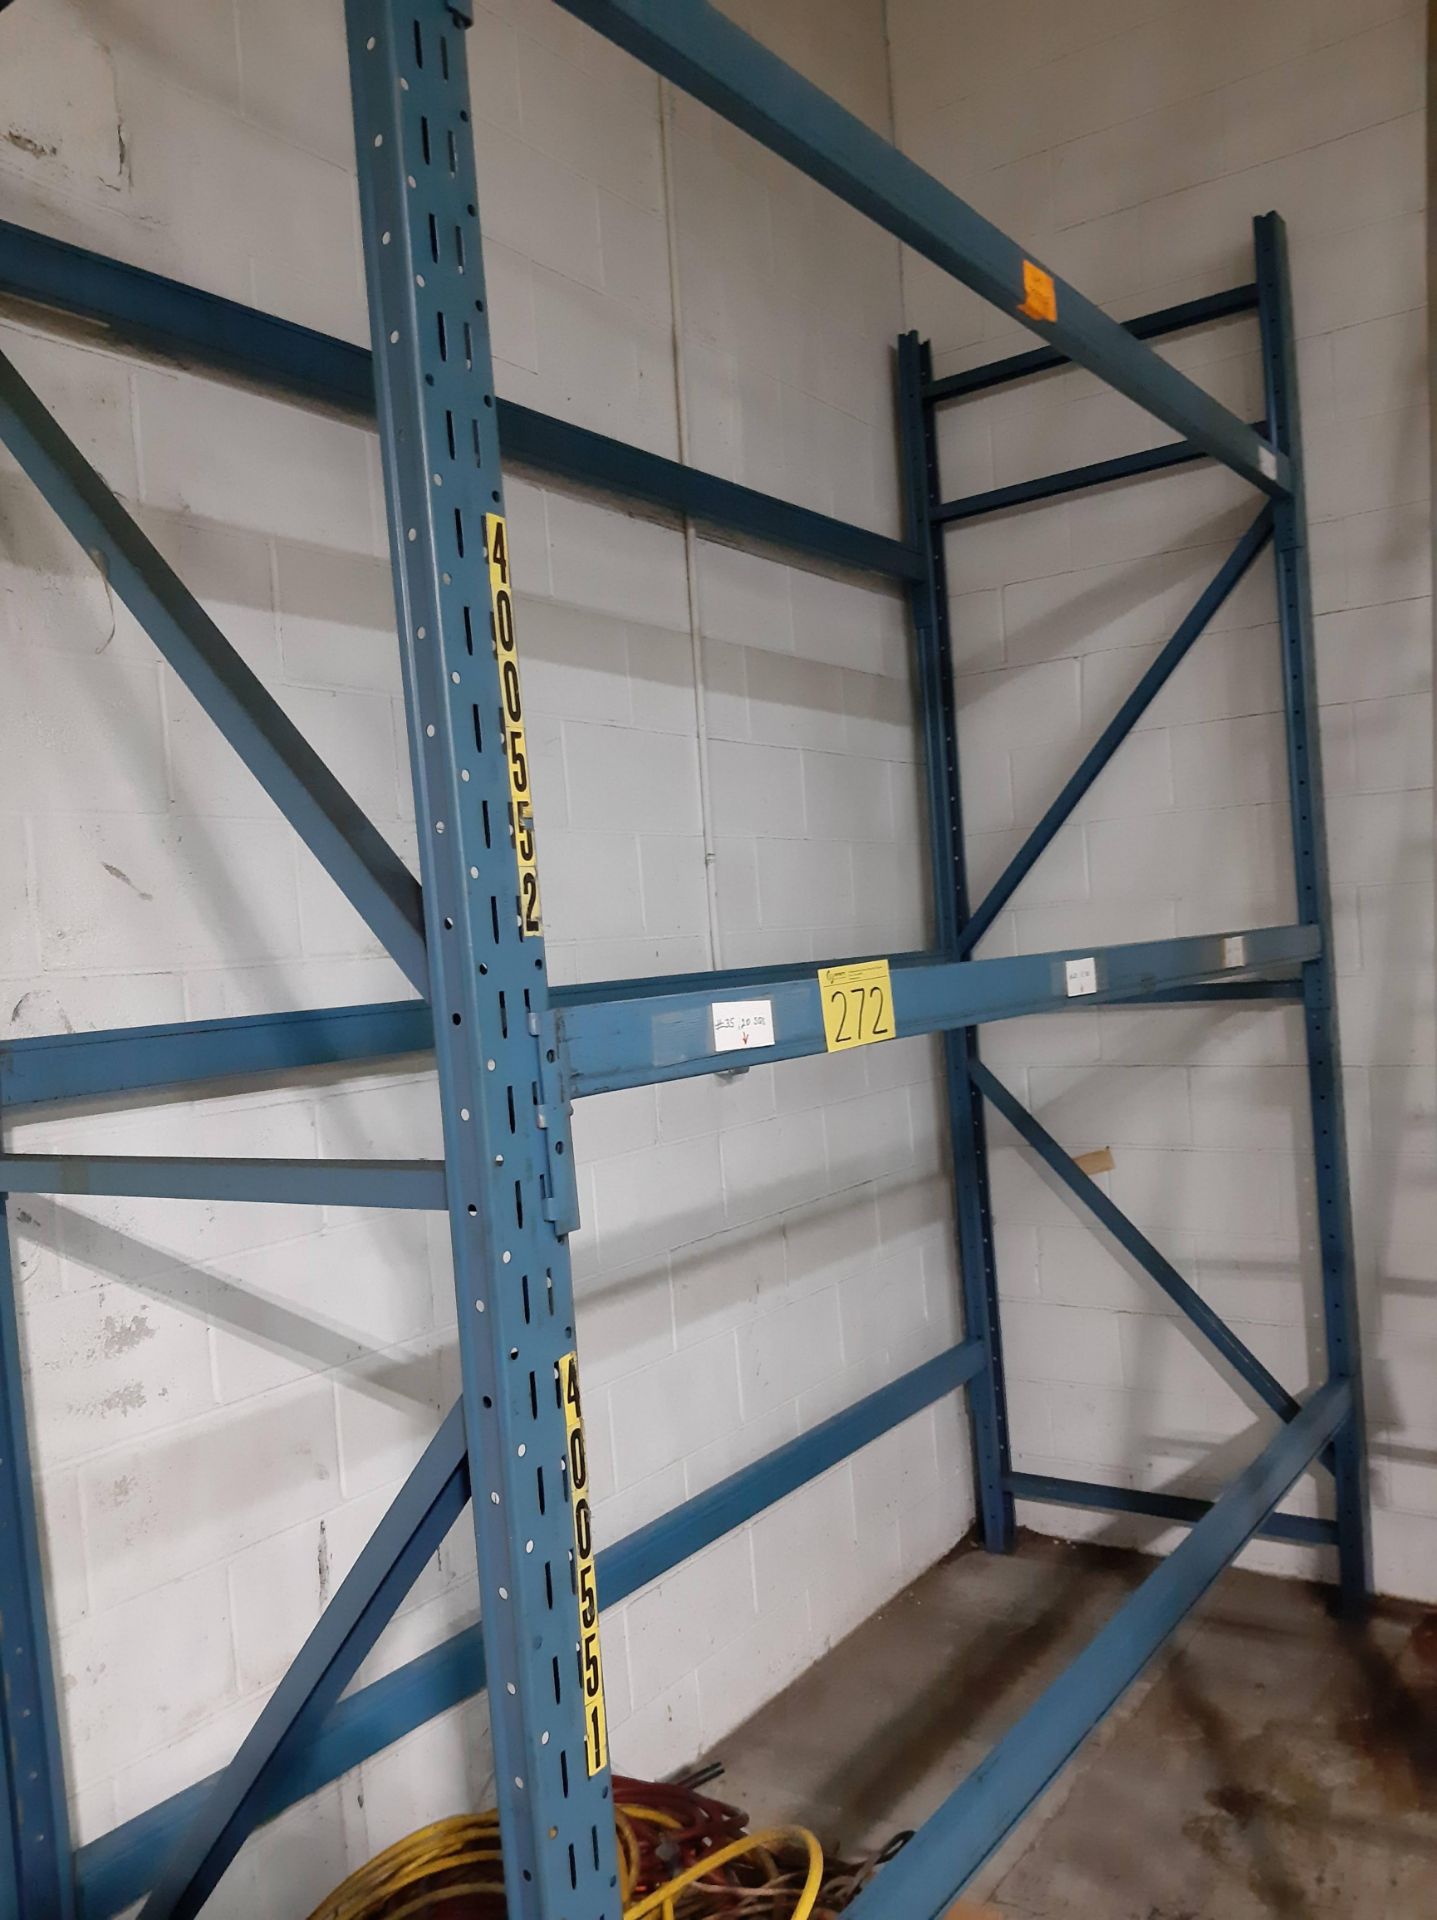 SECTION OF PALLET RACKING